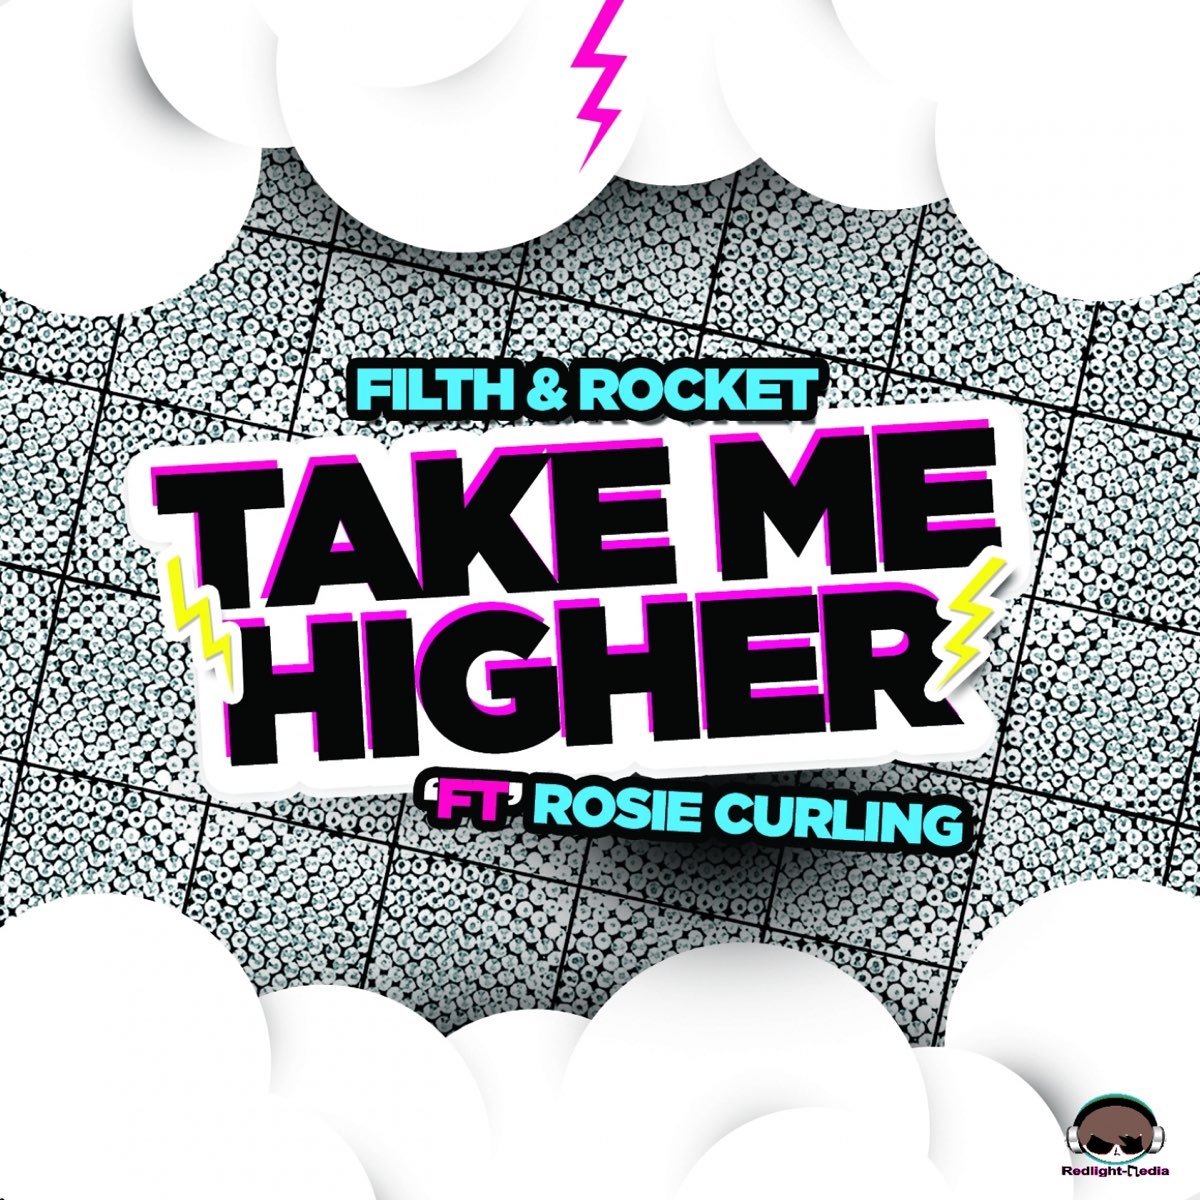 Takes your higher. Рокет филс. Rocket музыка. Millennium 2 take me higher. Take me higher fixing Fire.